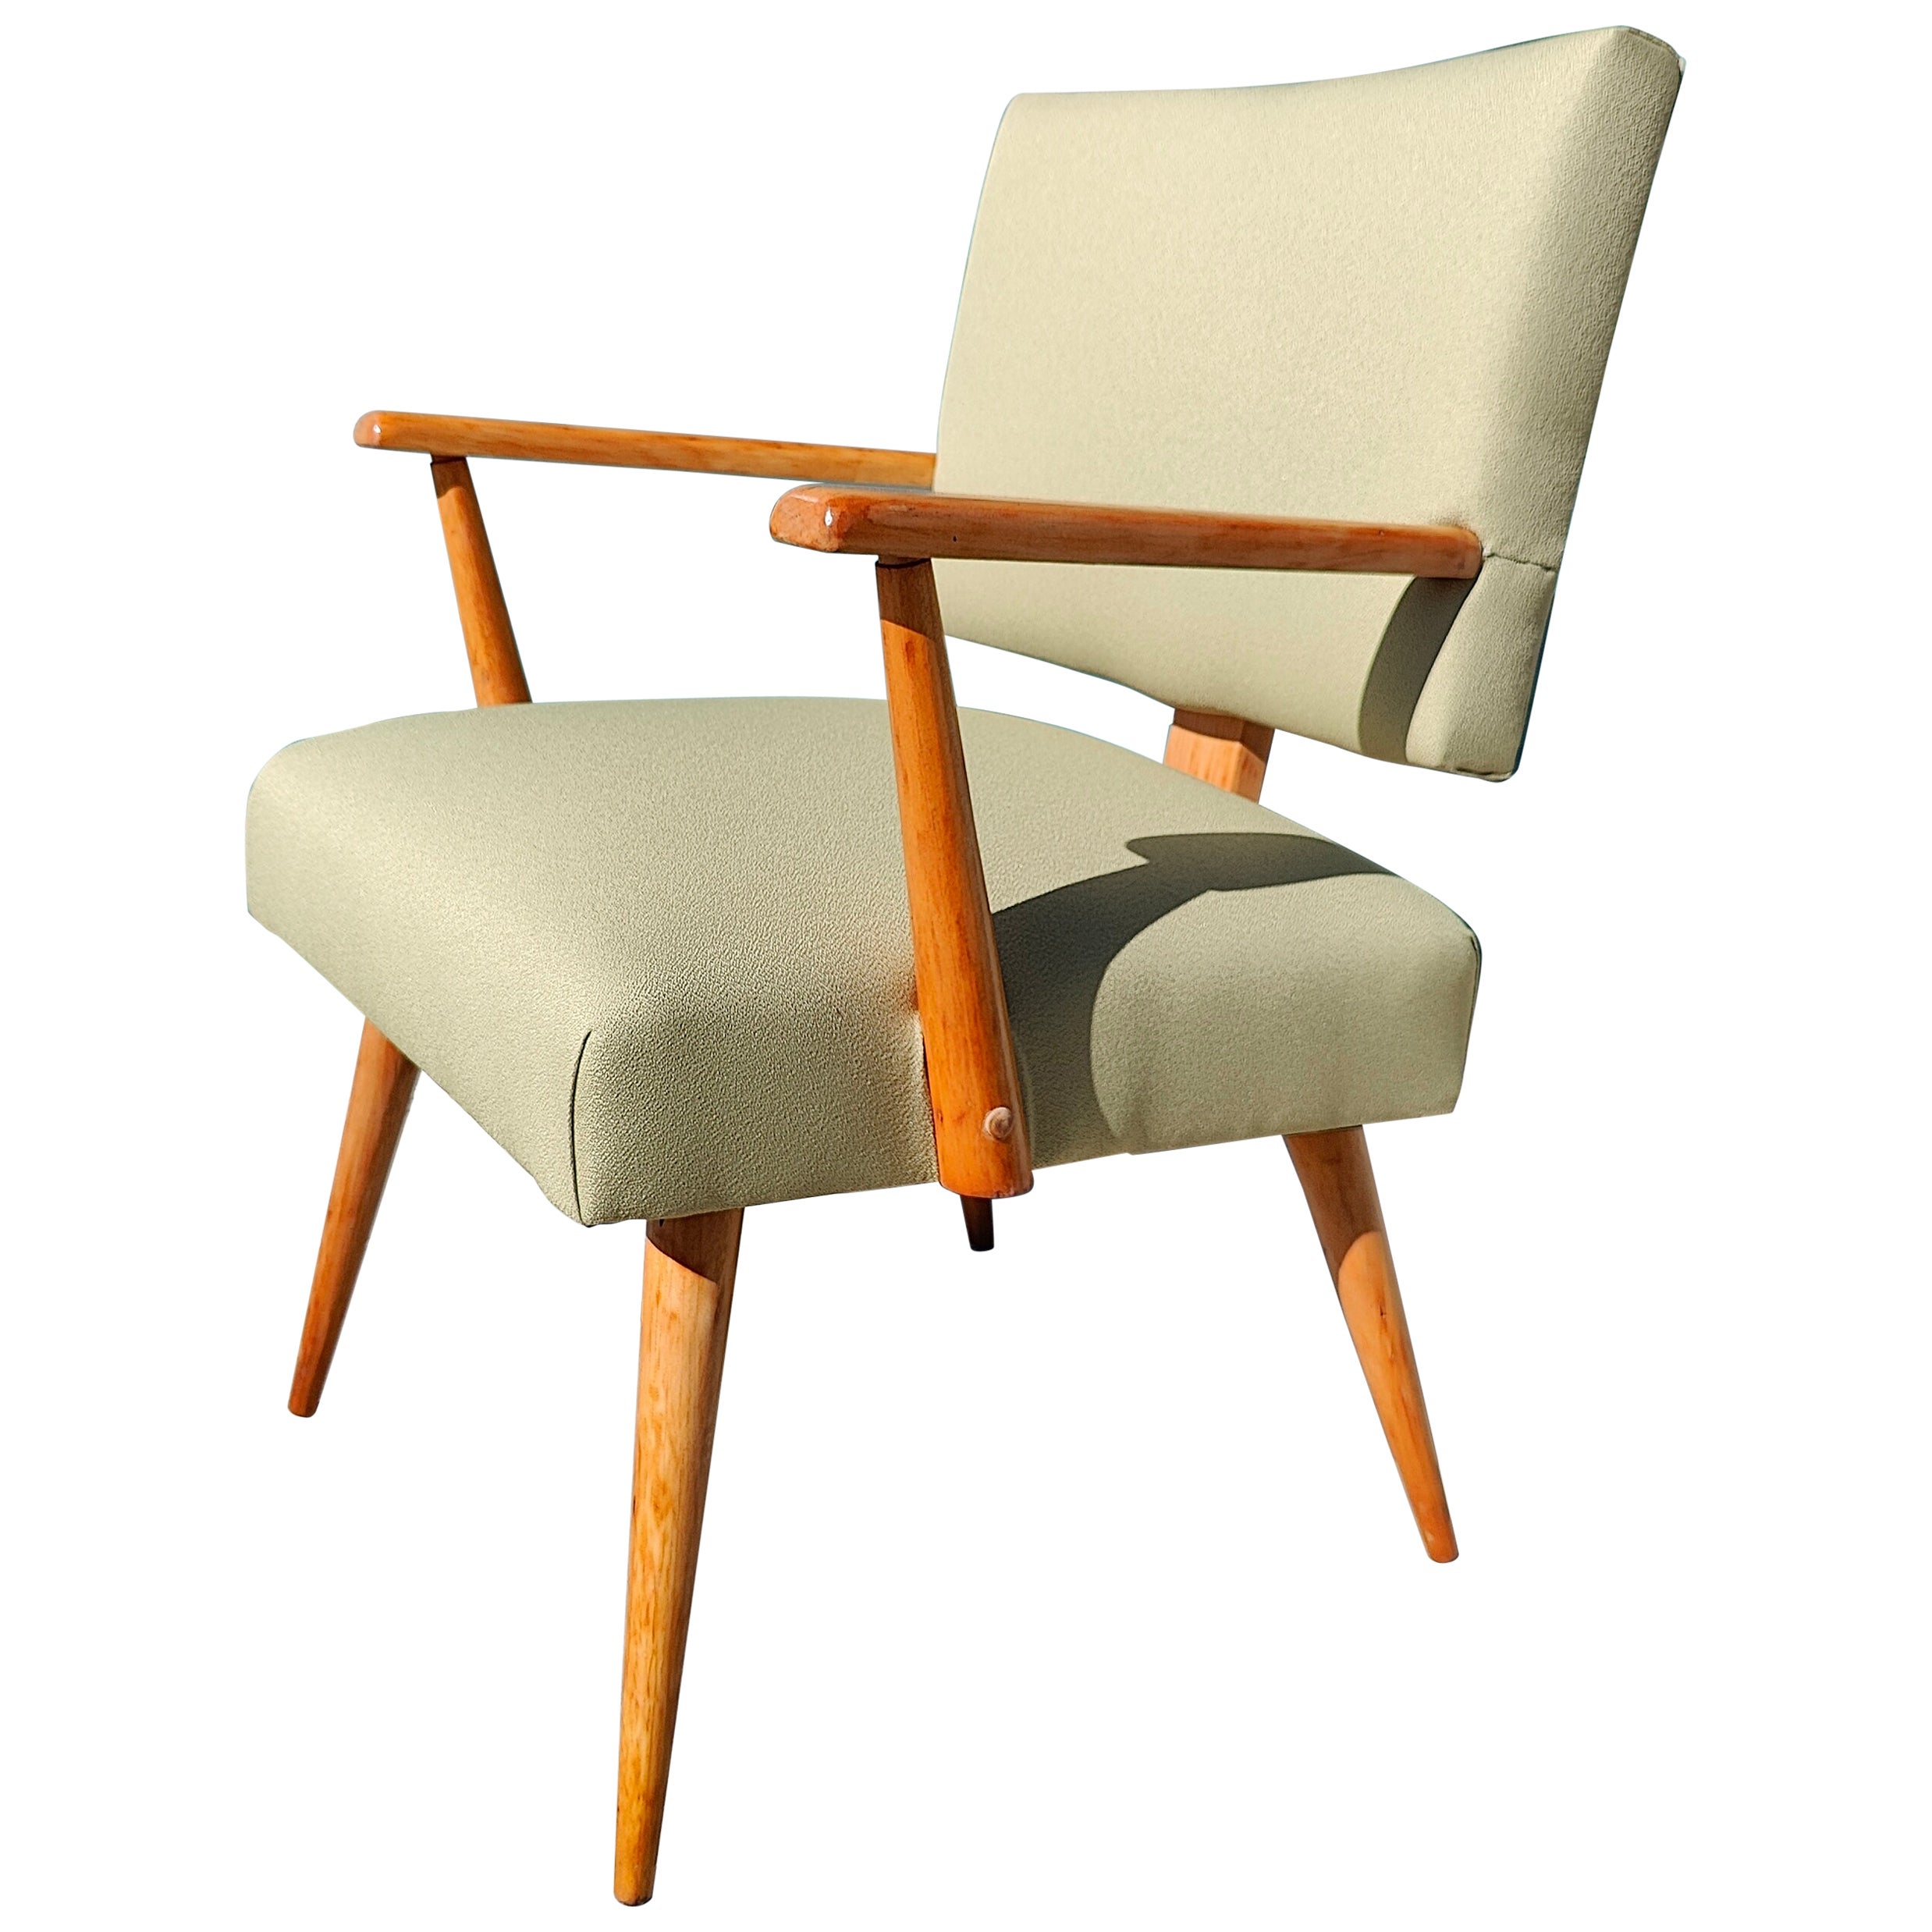 Small Vintage Mid-Century Modern Lounge Chair For Sale